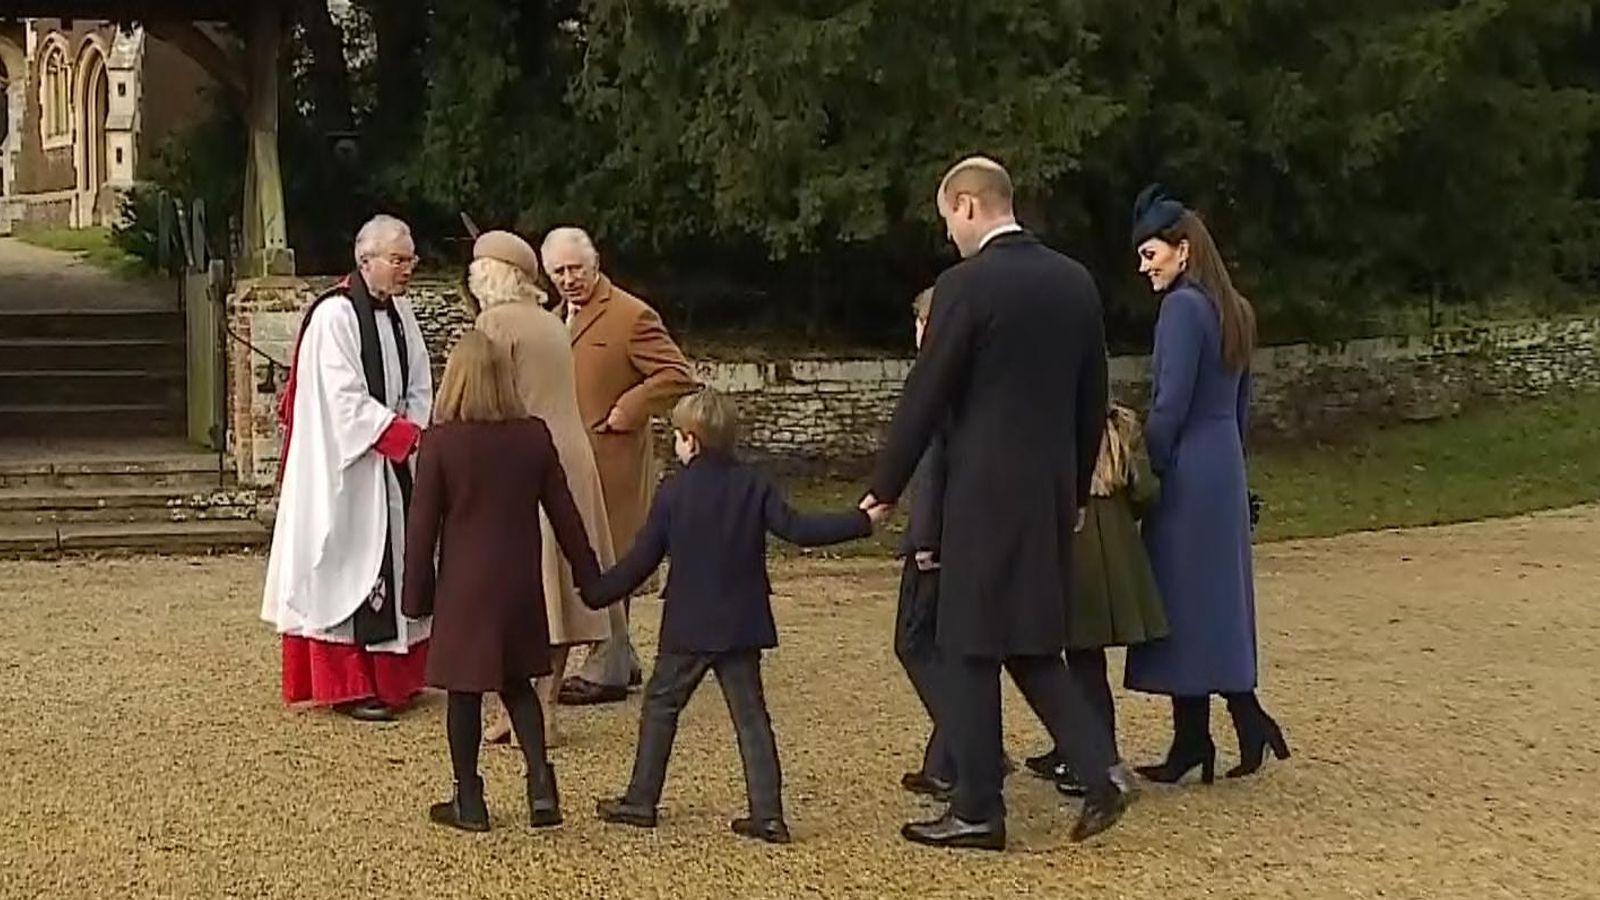 Royal Family members arrive at Sandringham church for traditional